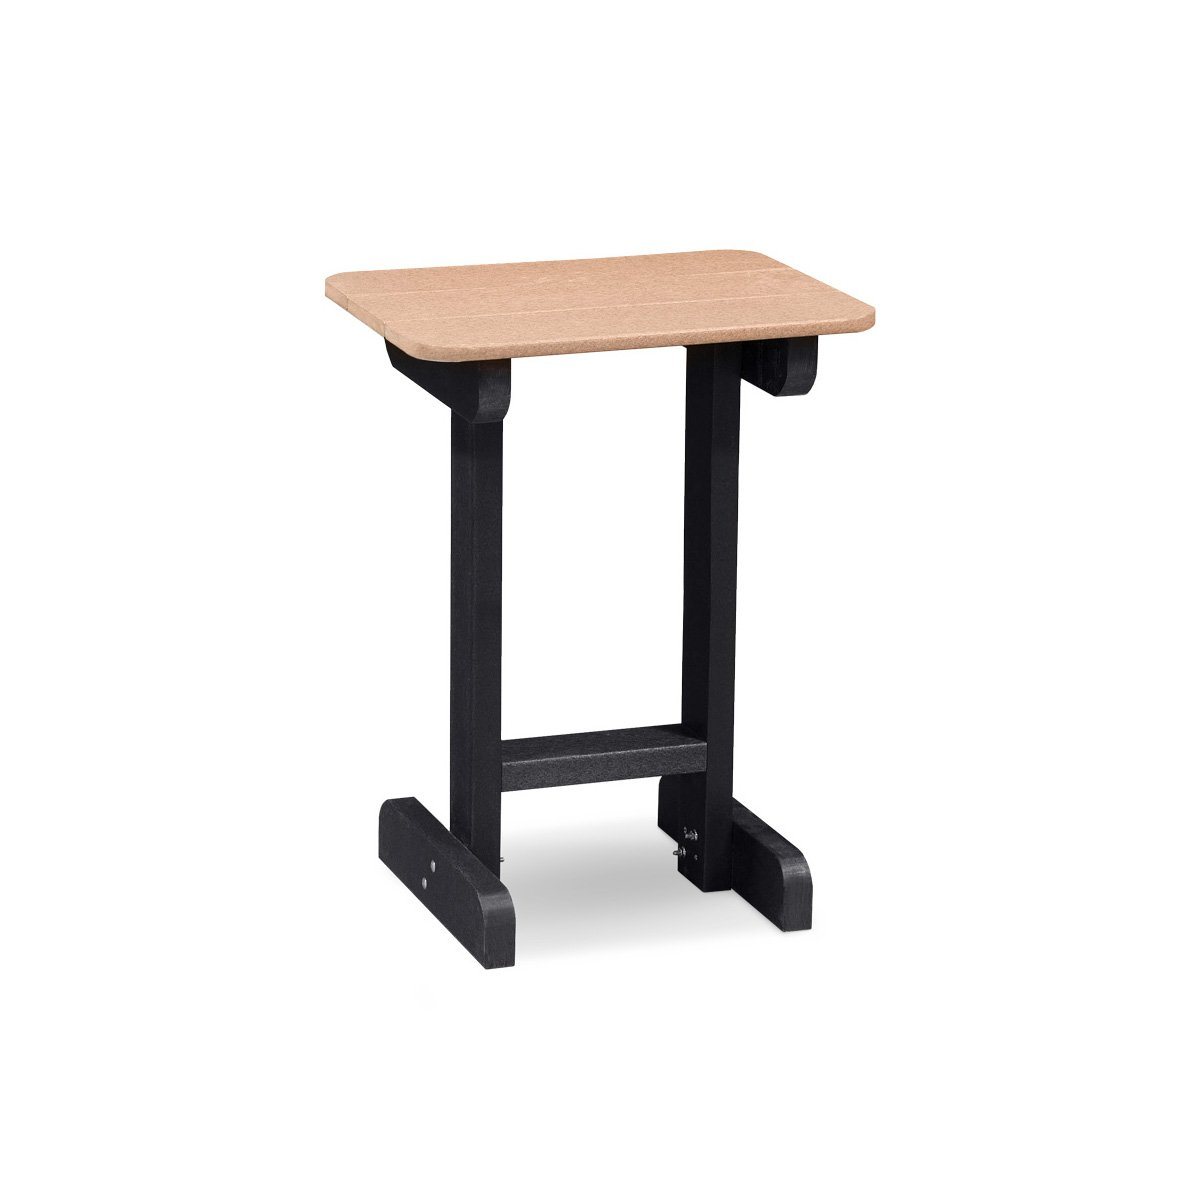 30 inch Recycled Poly End Table - Express Outdoor Furniture Simply Amish Weathered Wood and Black 